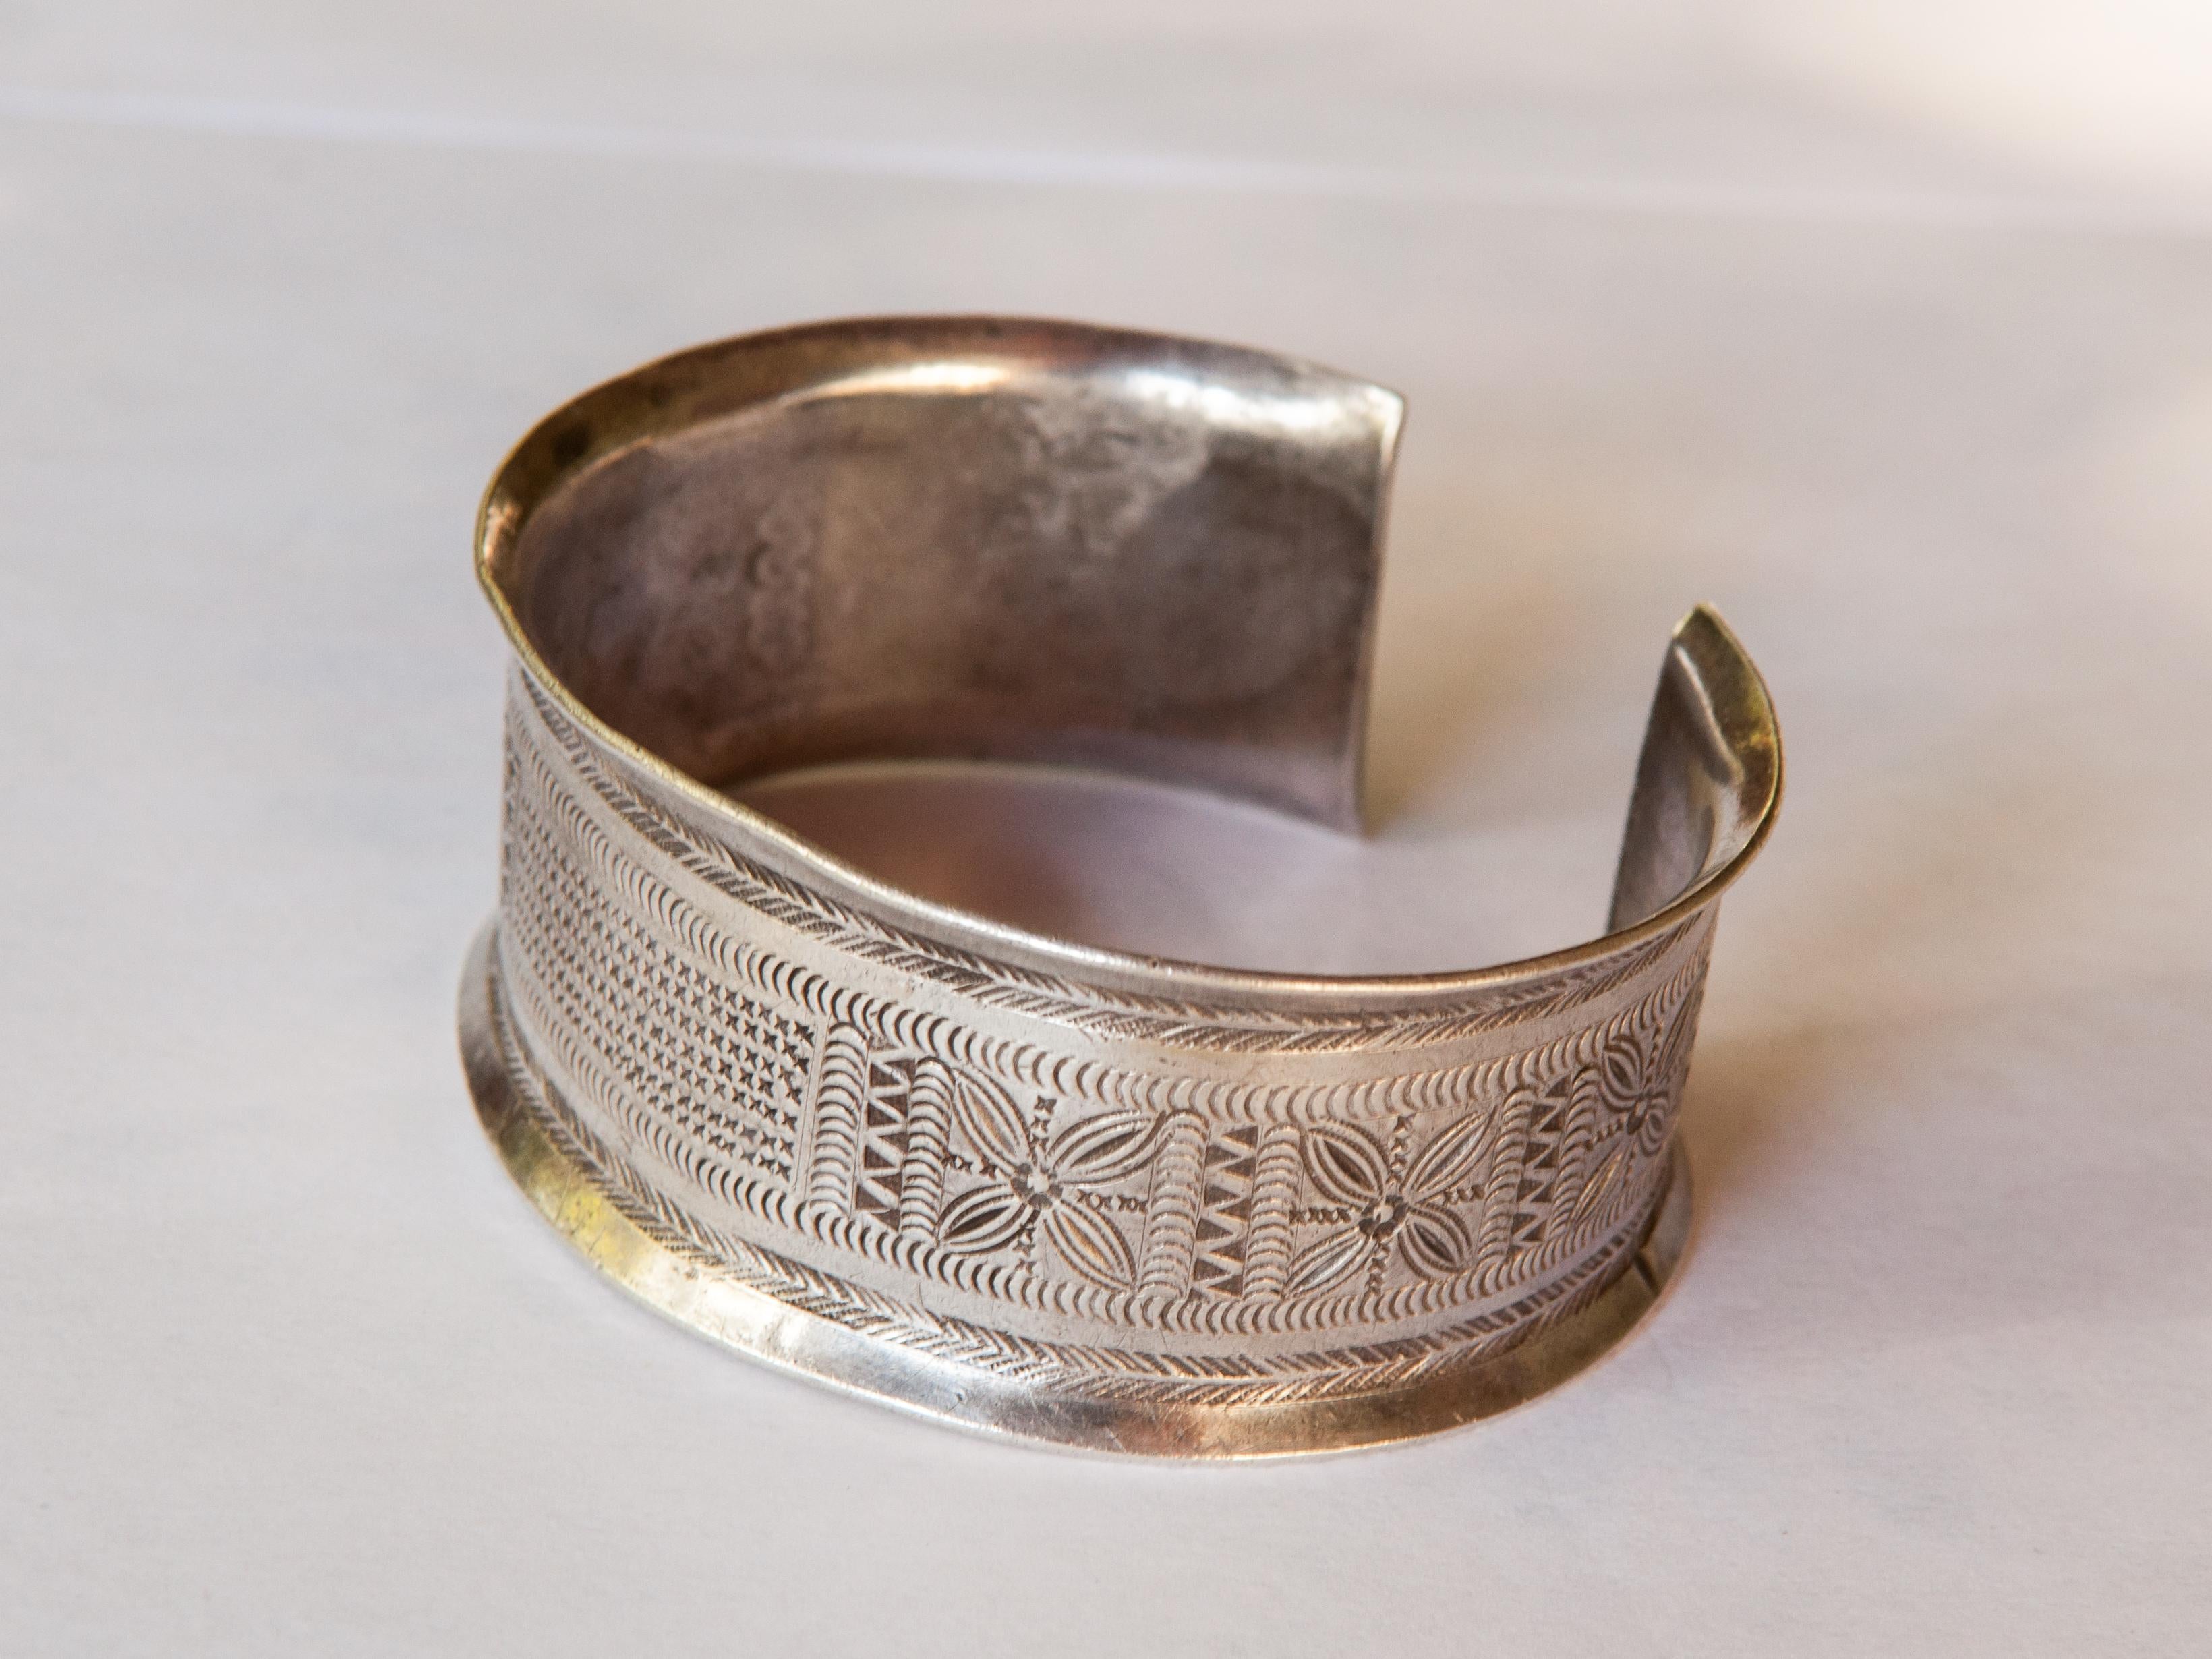 Vintage silver Bracelet Karen of North Thailand, mid-late 20th century
This hand worked silver bracelet comes from the Karen ethnic minority of northwest Thailand. It measures: 2.5 to 3 inches in diameter, with a 1 inch wide band, and weighs out at